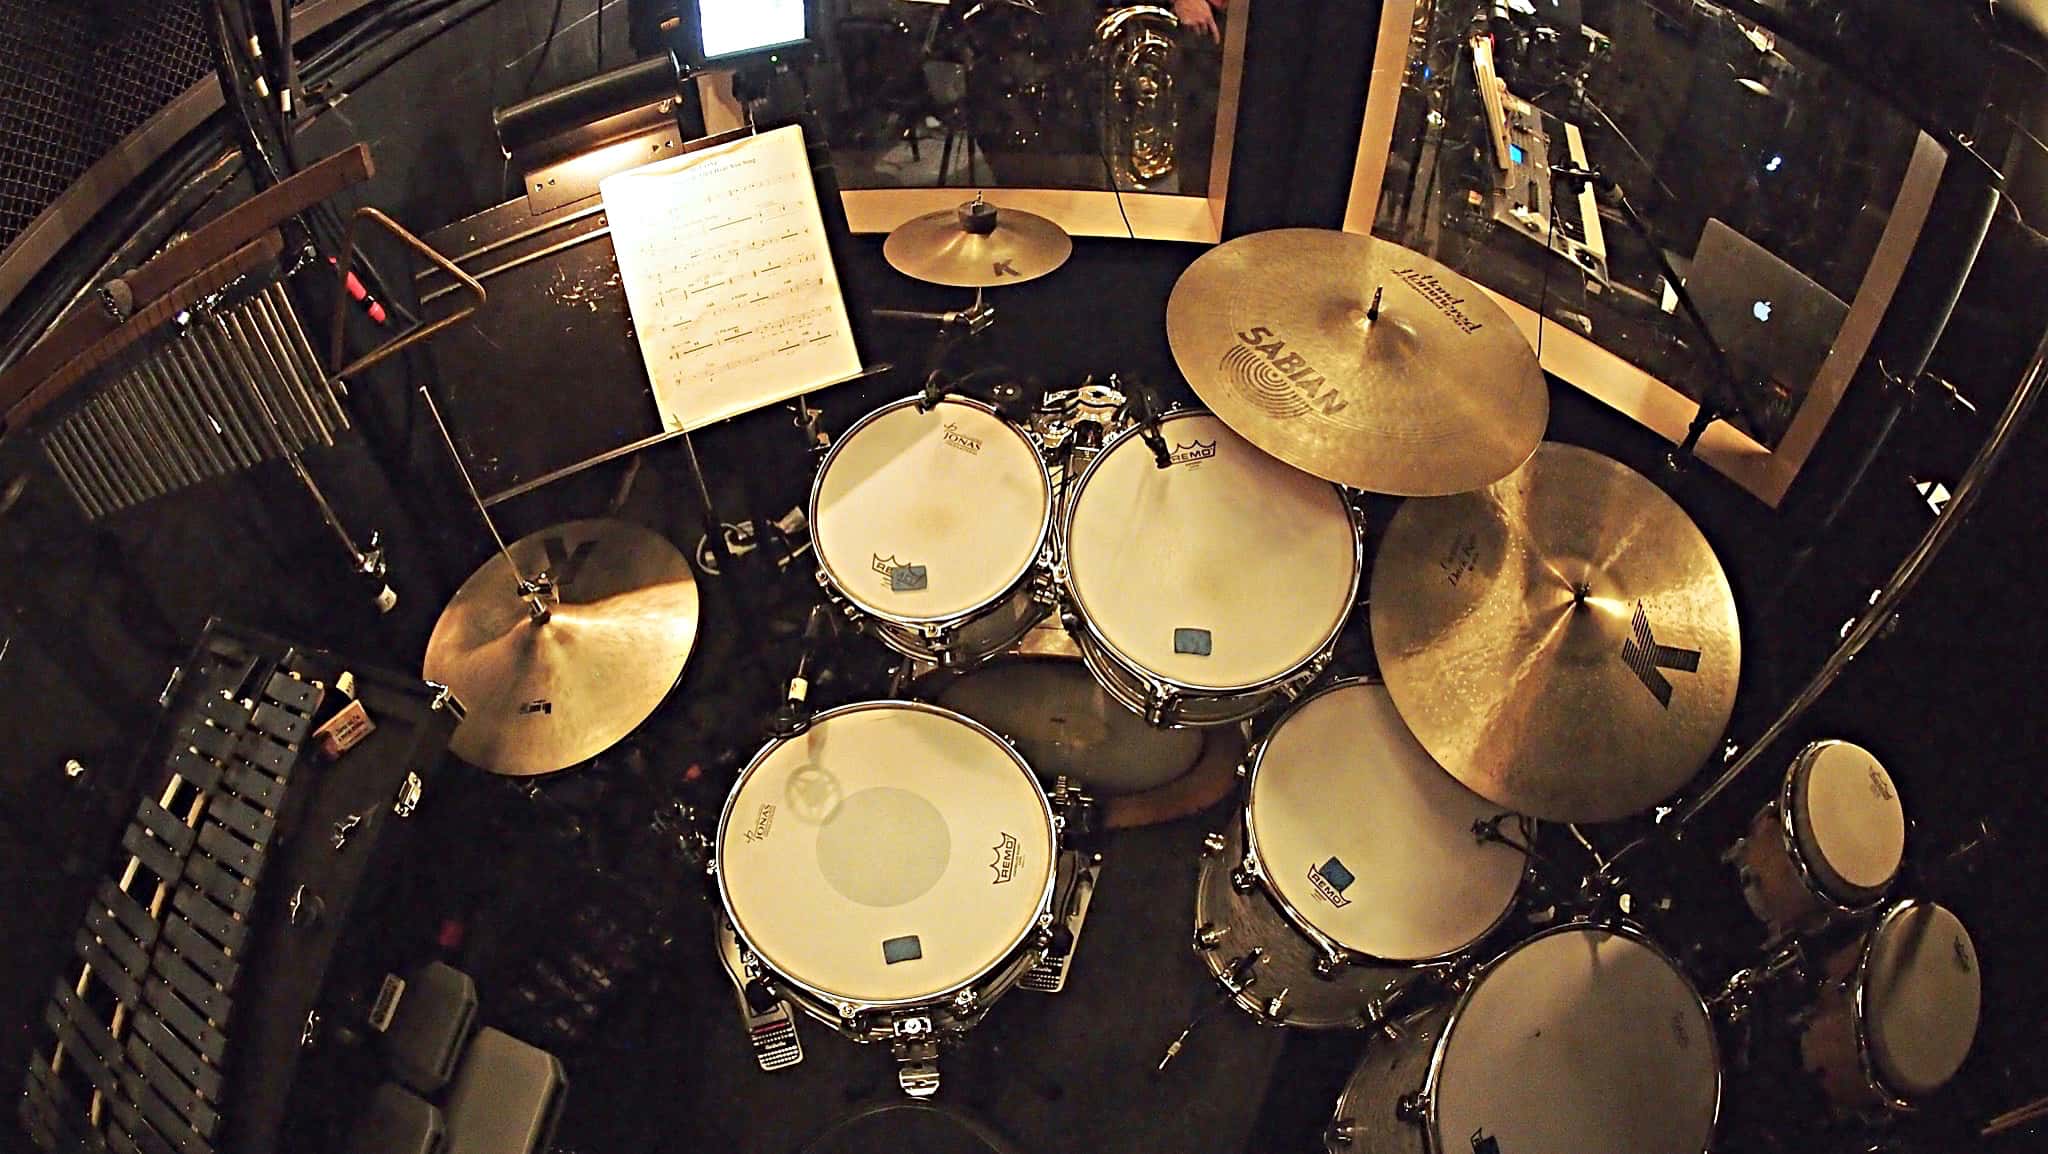 Aaron Nix's setup for the National Tour of Love Never Dies at the Paramount Theatre in Seattle, Washington.